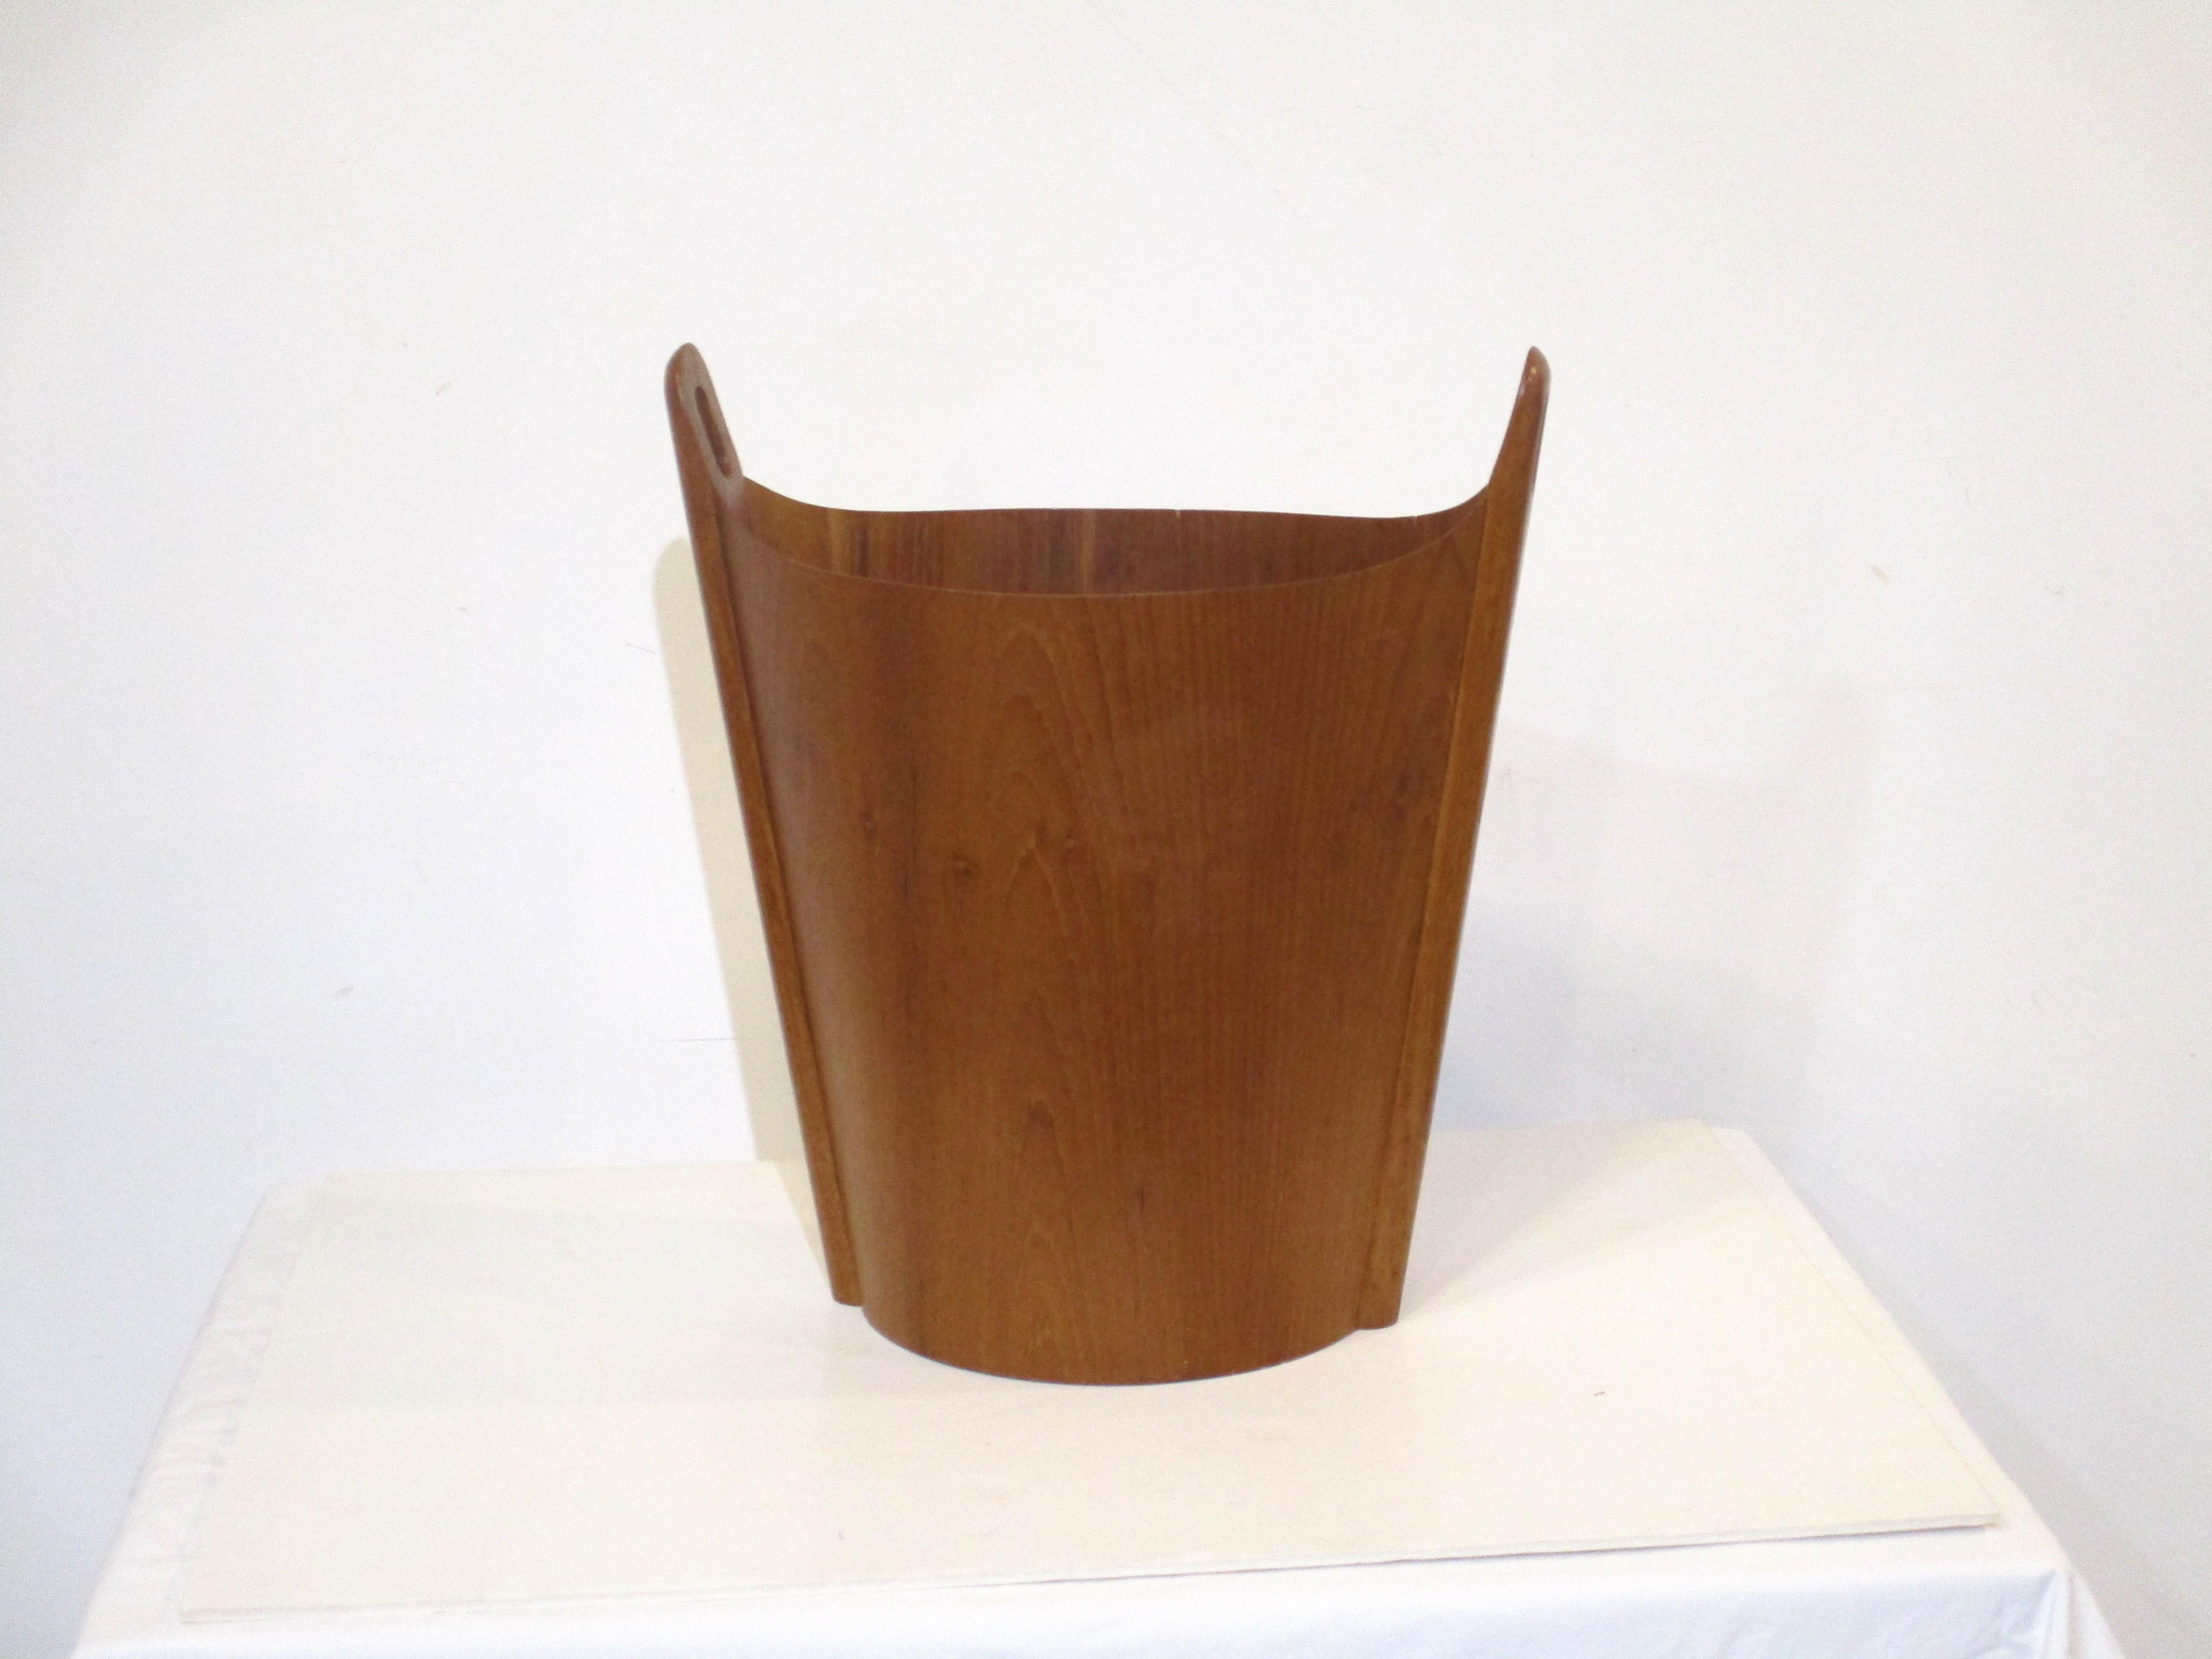 A very well crafted teak wood waste or magazine basket with handles to each side. A simple but complex form with the bent wood curved and integrated into the handles, designed by Einar Barnes for P.S. Heggen made in Norway. Retains the original